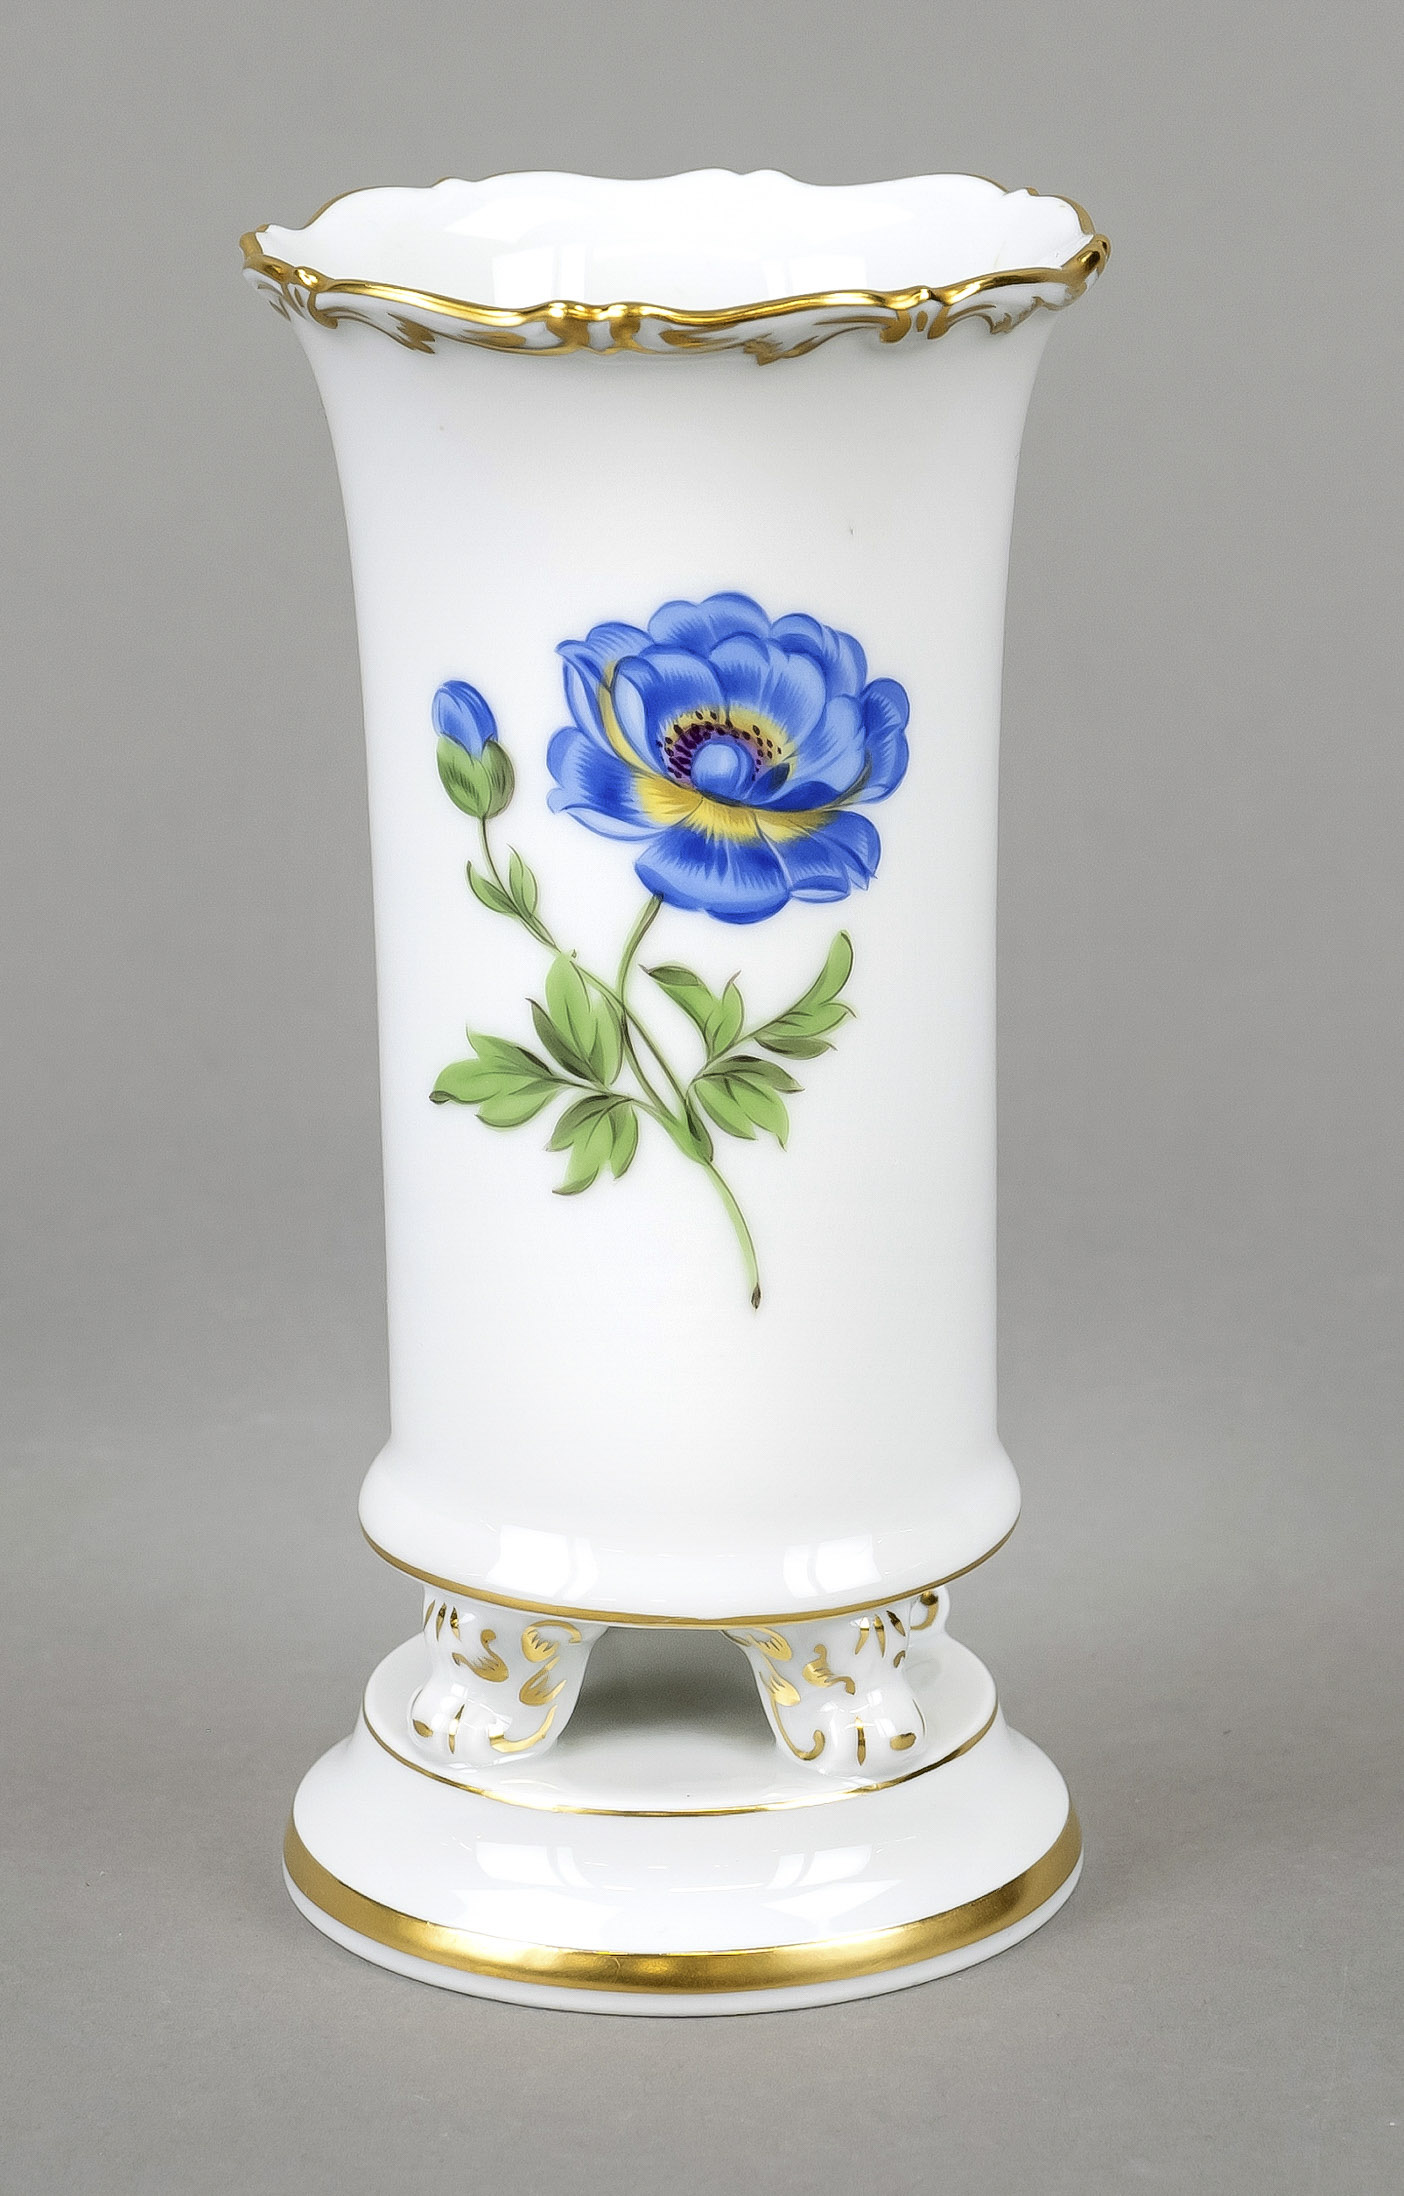 Stove vase, Meissen, 1970s, 1st choice, polychrome floral painting with decorative gilding, h. 14.